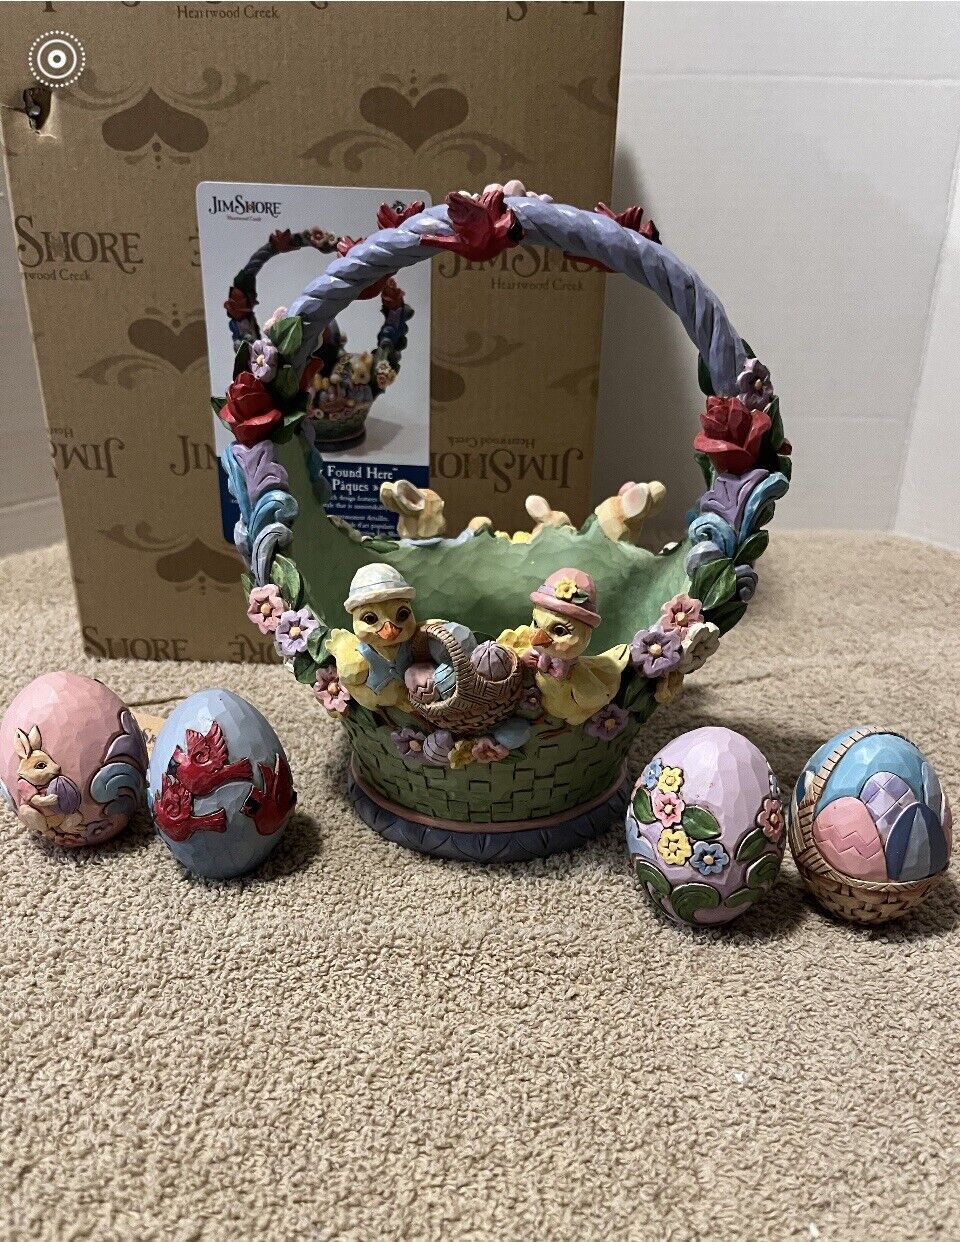 Jim Shore 2020 Easter Basket “Easter Cheer Found Here.” 